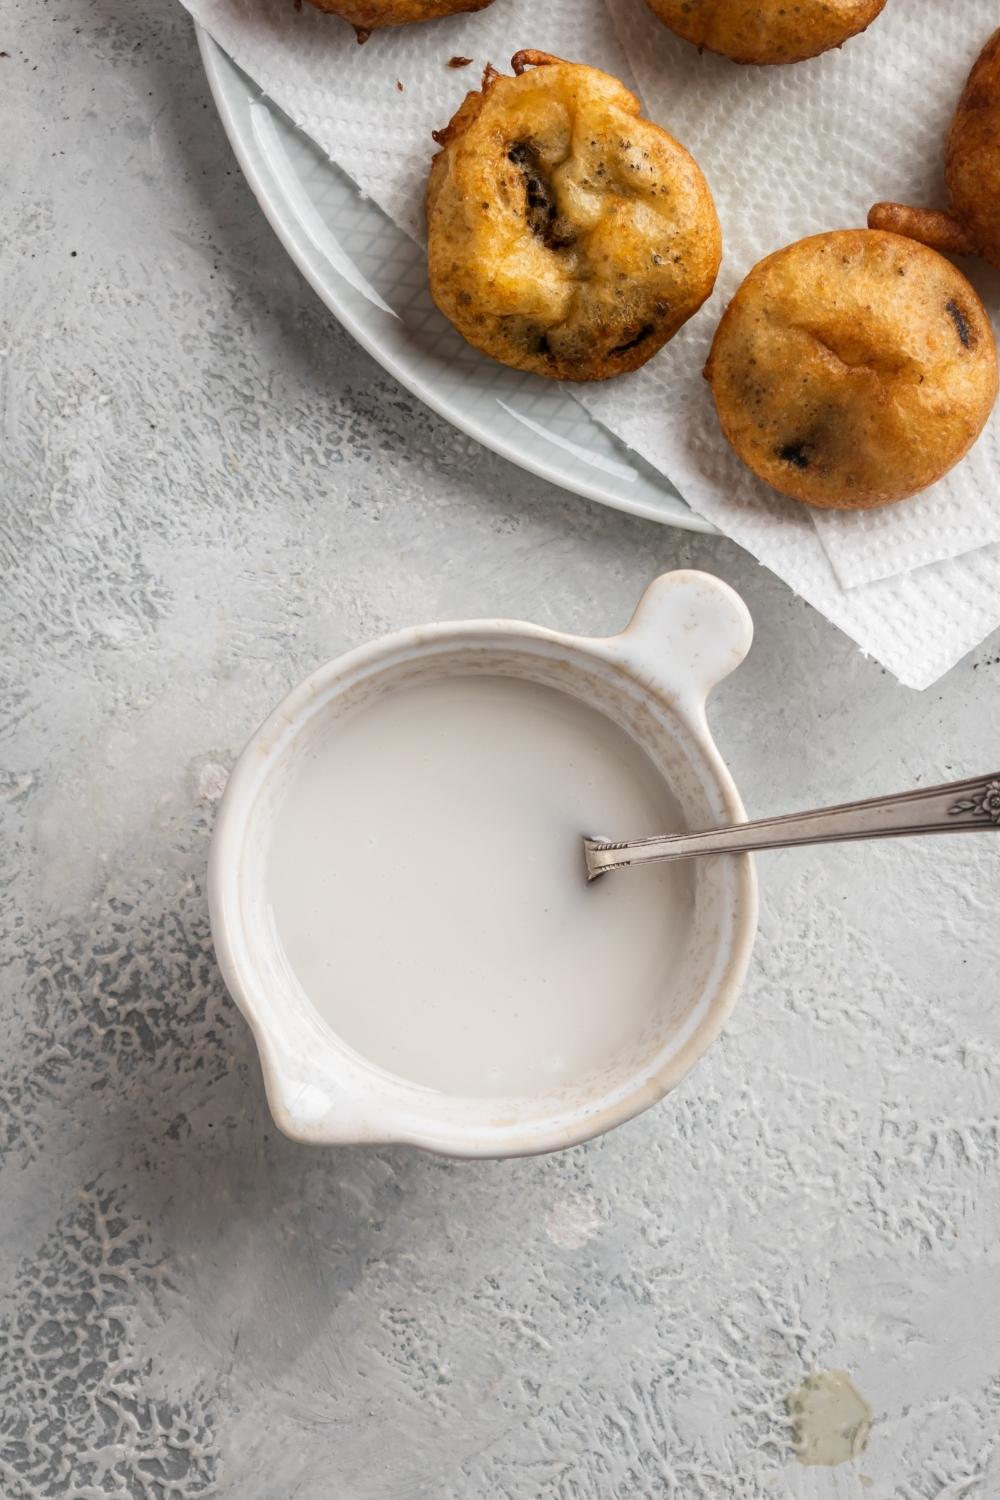 A ceramic bowl of glaze with a spoon in it. Above that is a plate with paper towels lining it and fried Oreos laid on top.